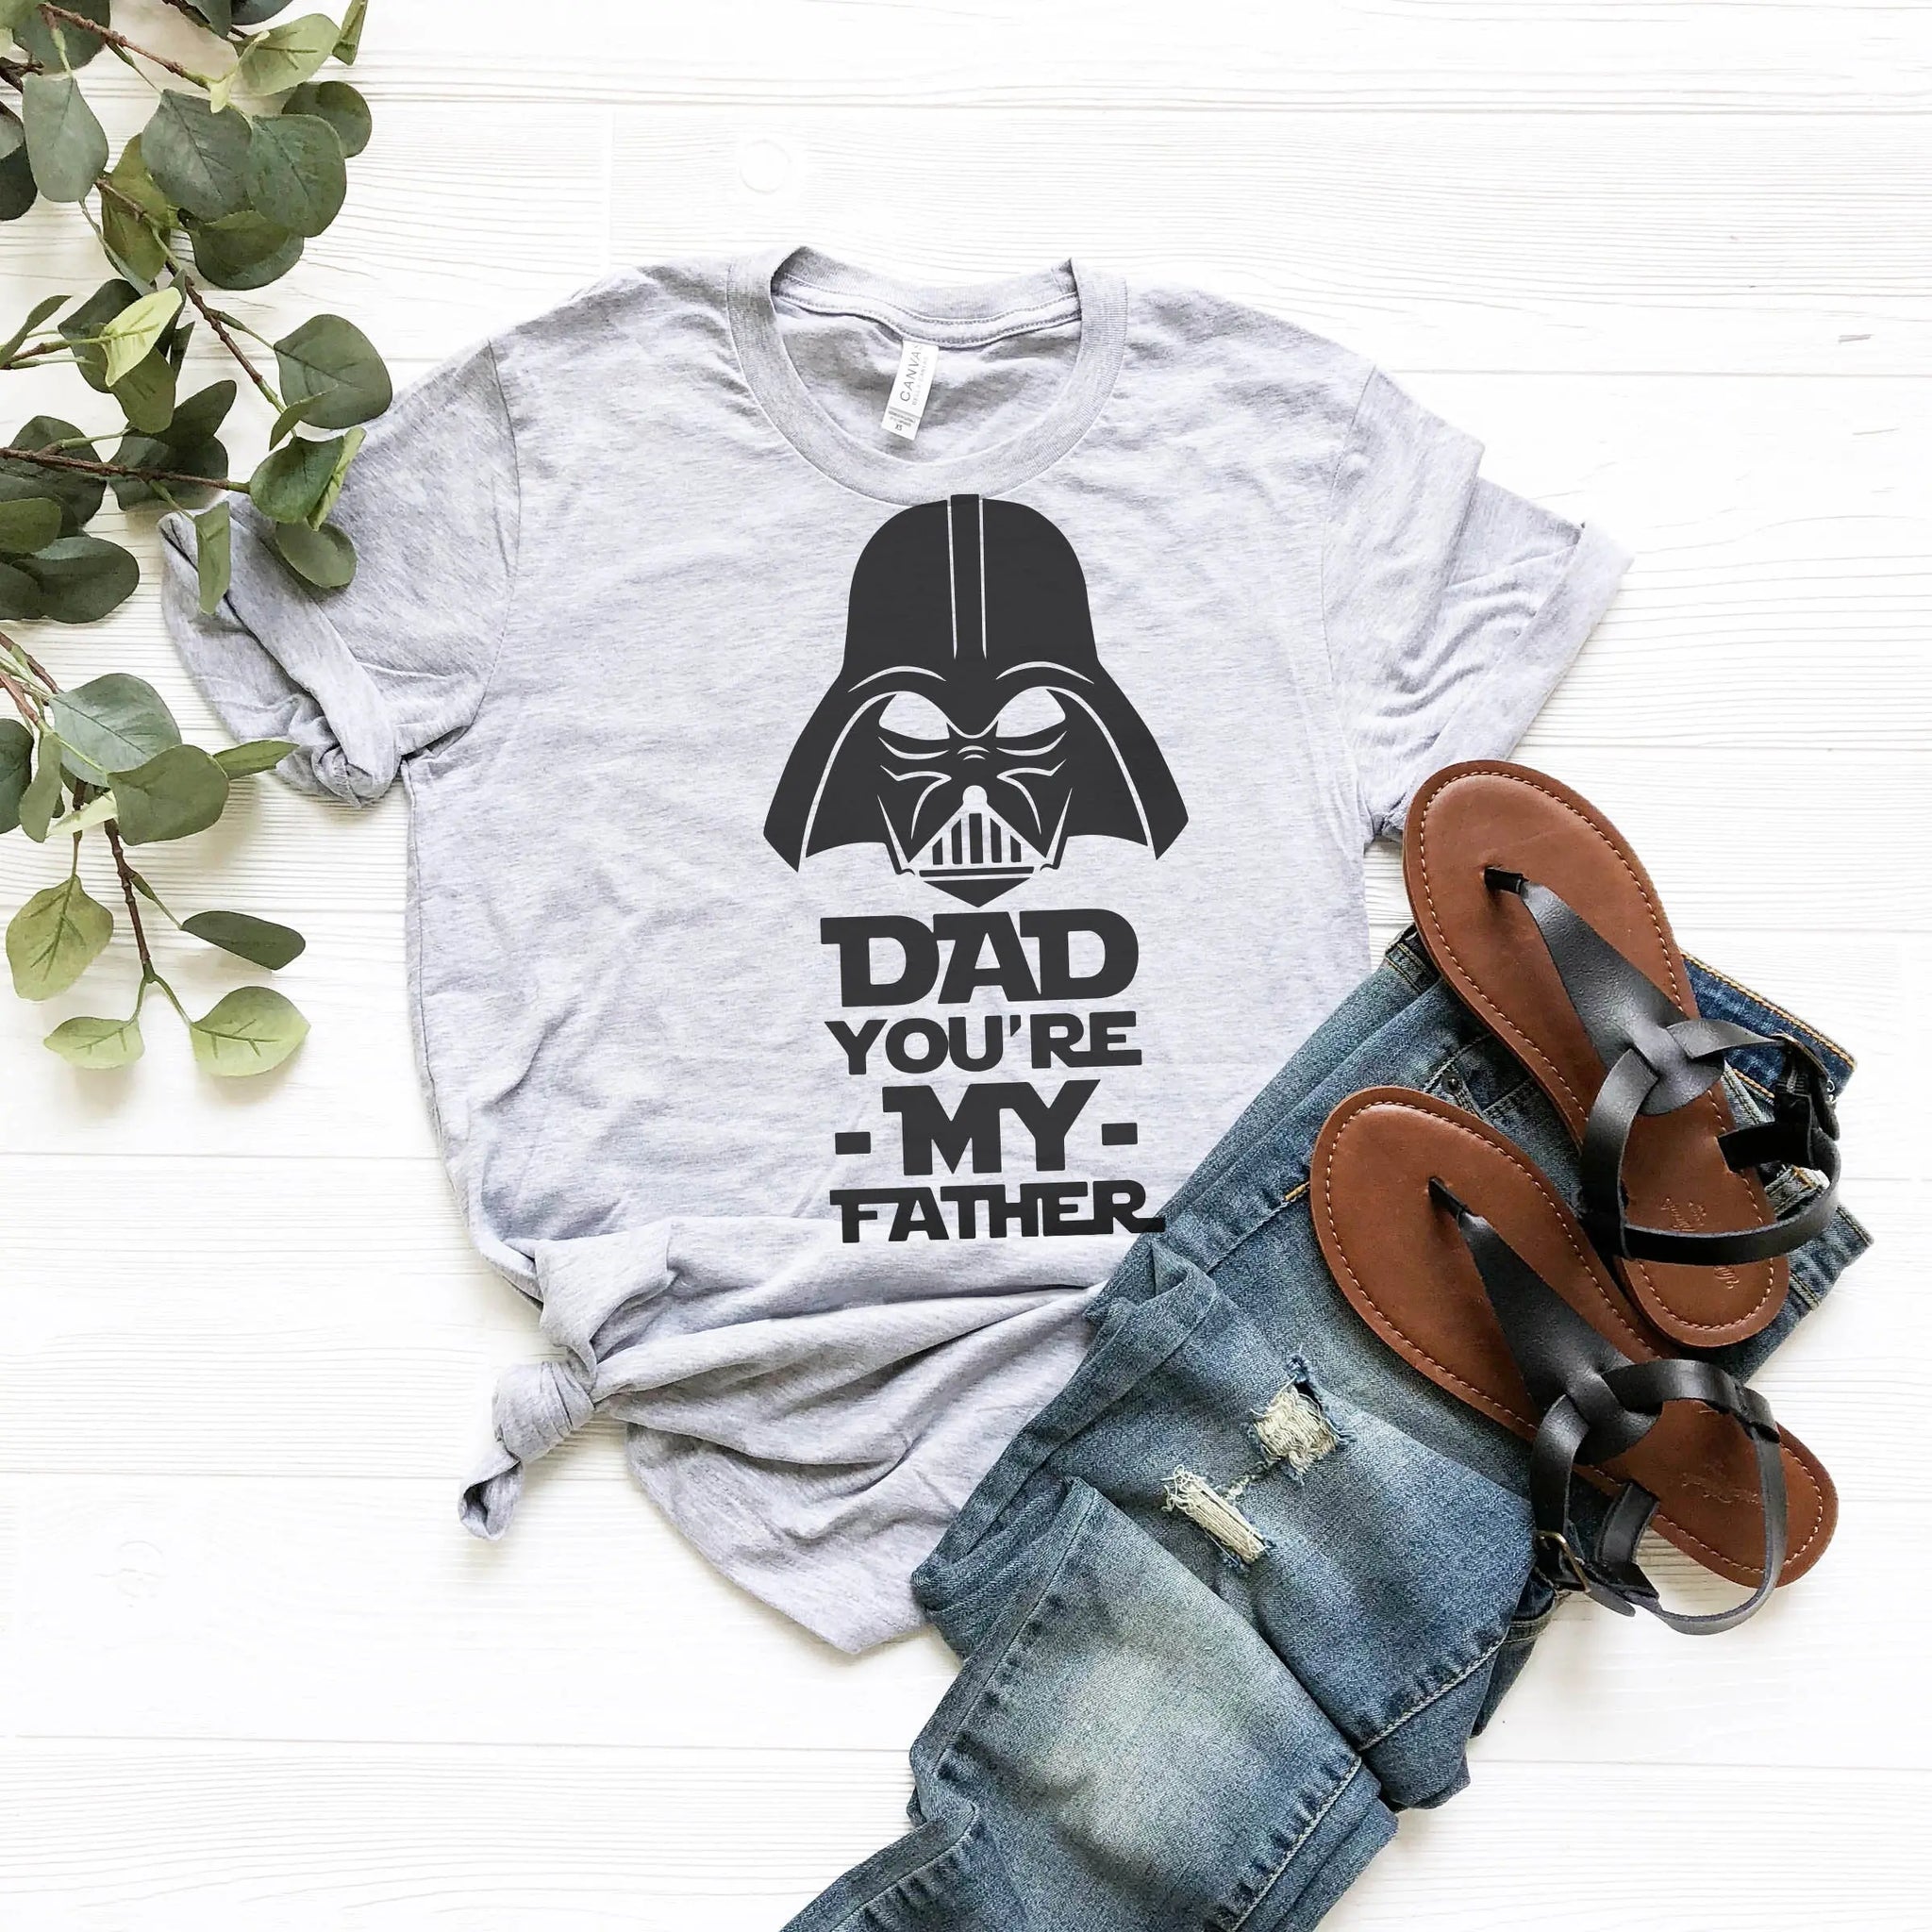 Funny Dad Tshirts for Fathers Day, Dad gift shirts, Dad shirts from daughter, Star wars Funny Shirts, for dad men husband,Dad Birthday, - Fastdeliverytees.com